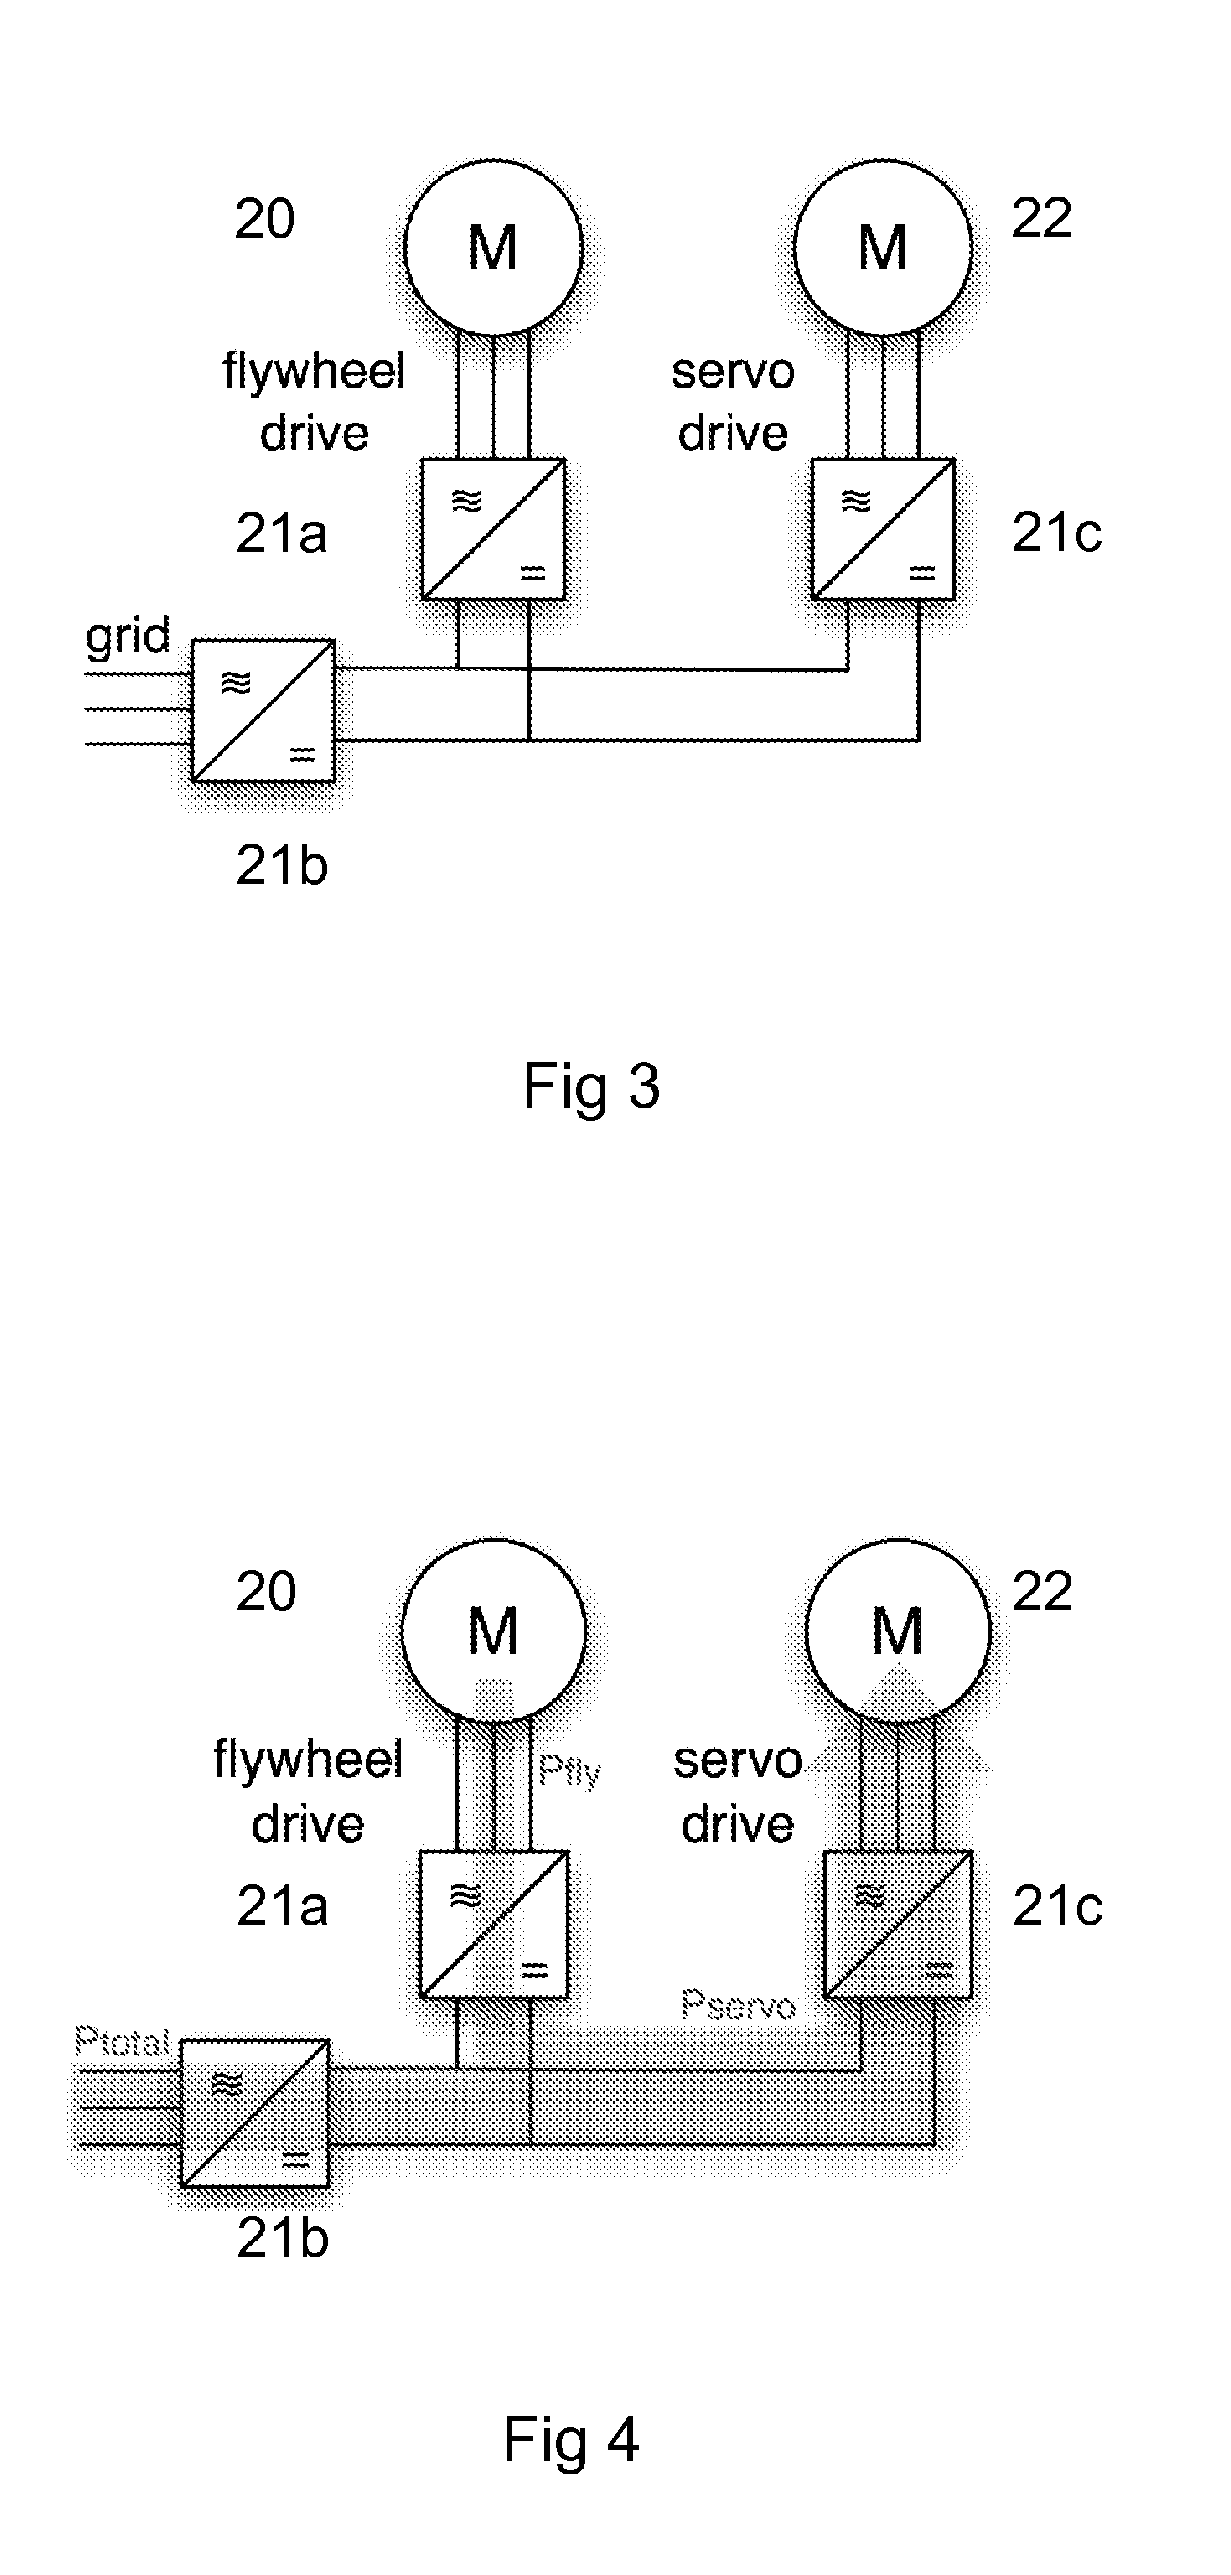 Method In A Production System For Limiting Peak Power